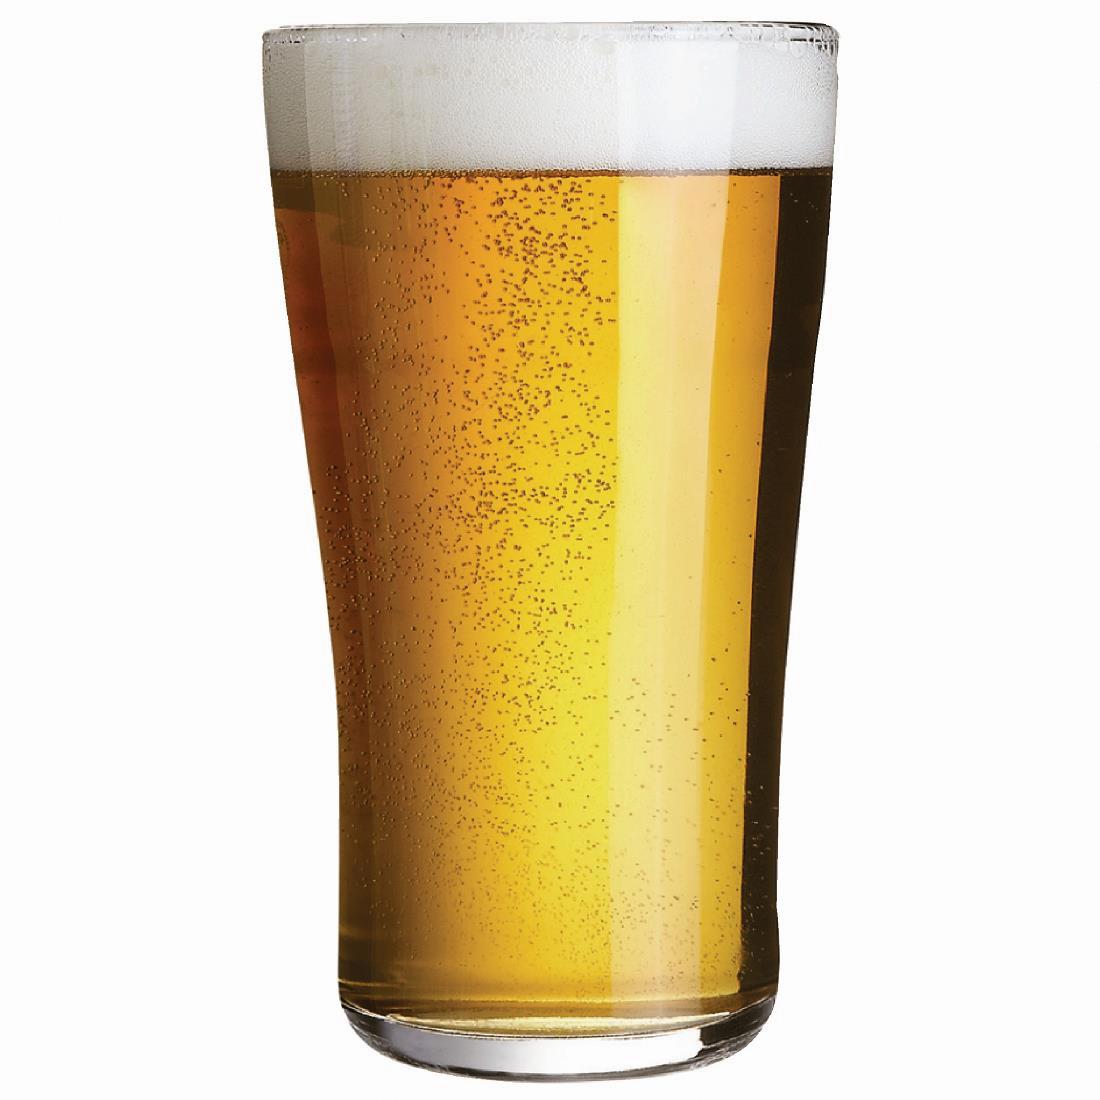 nucleated beer glass